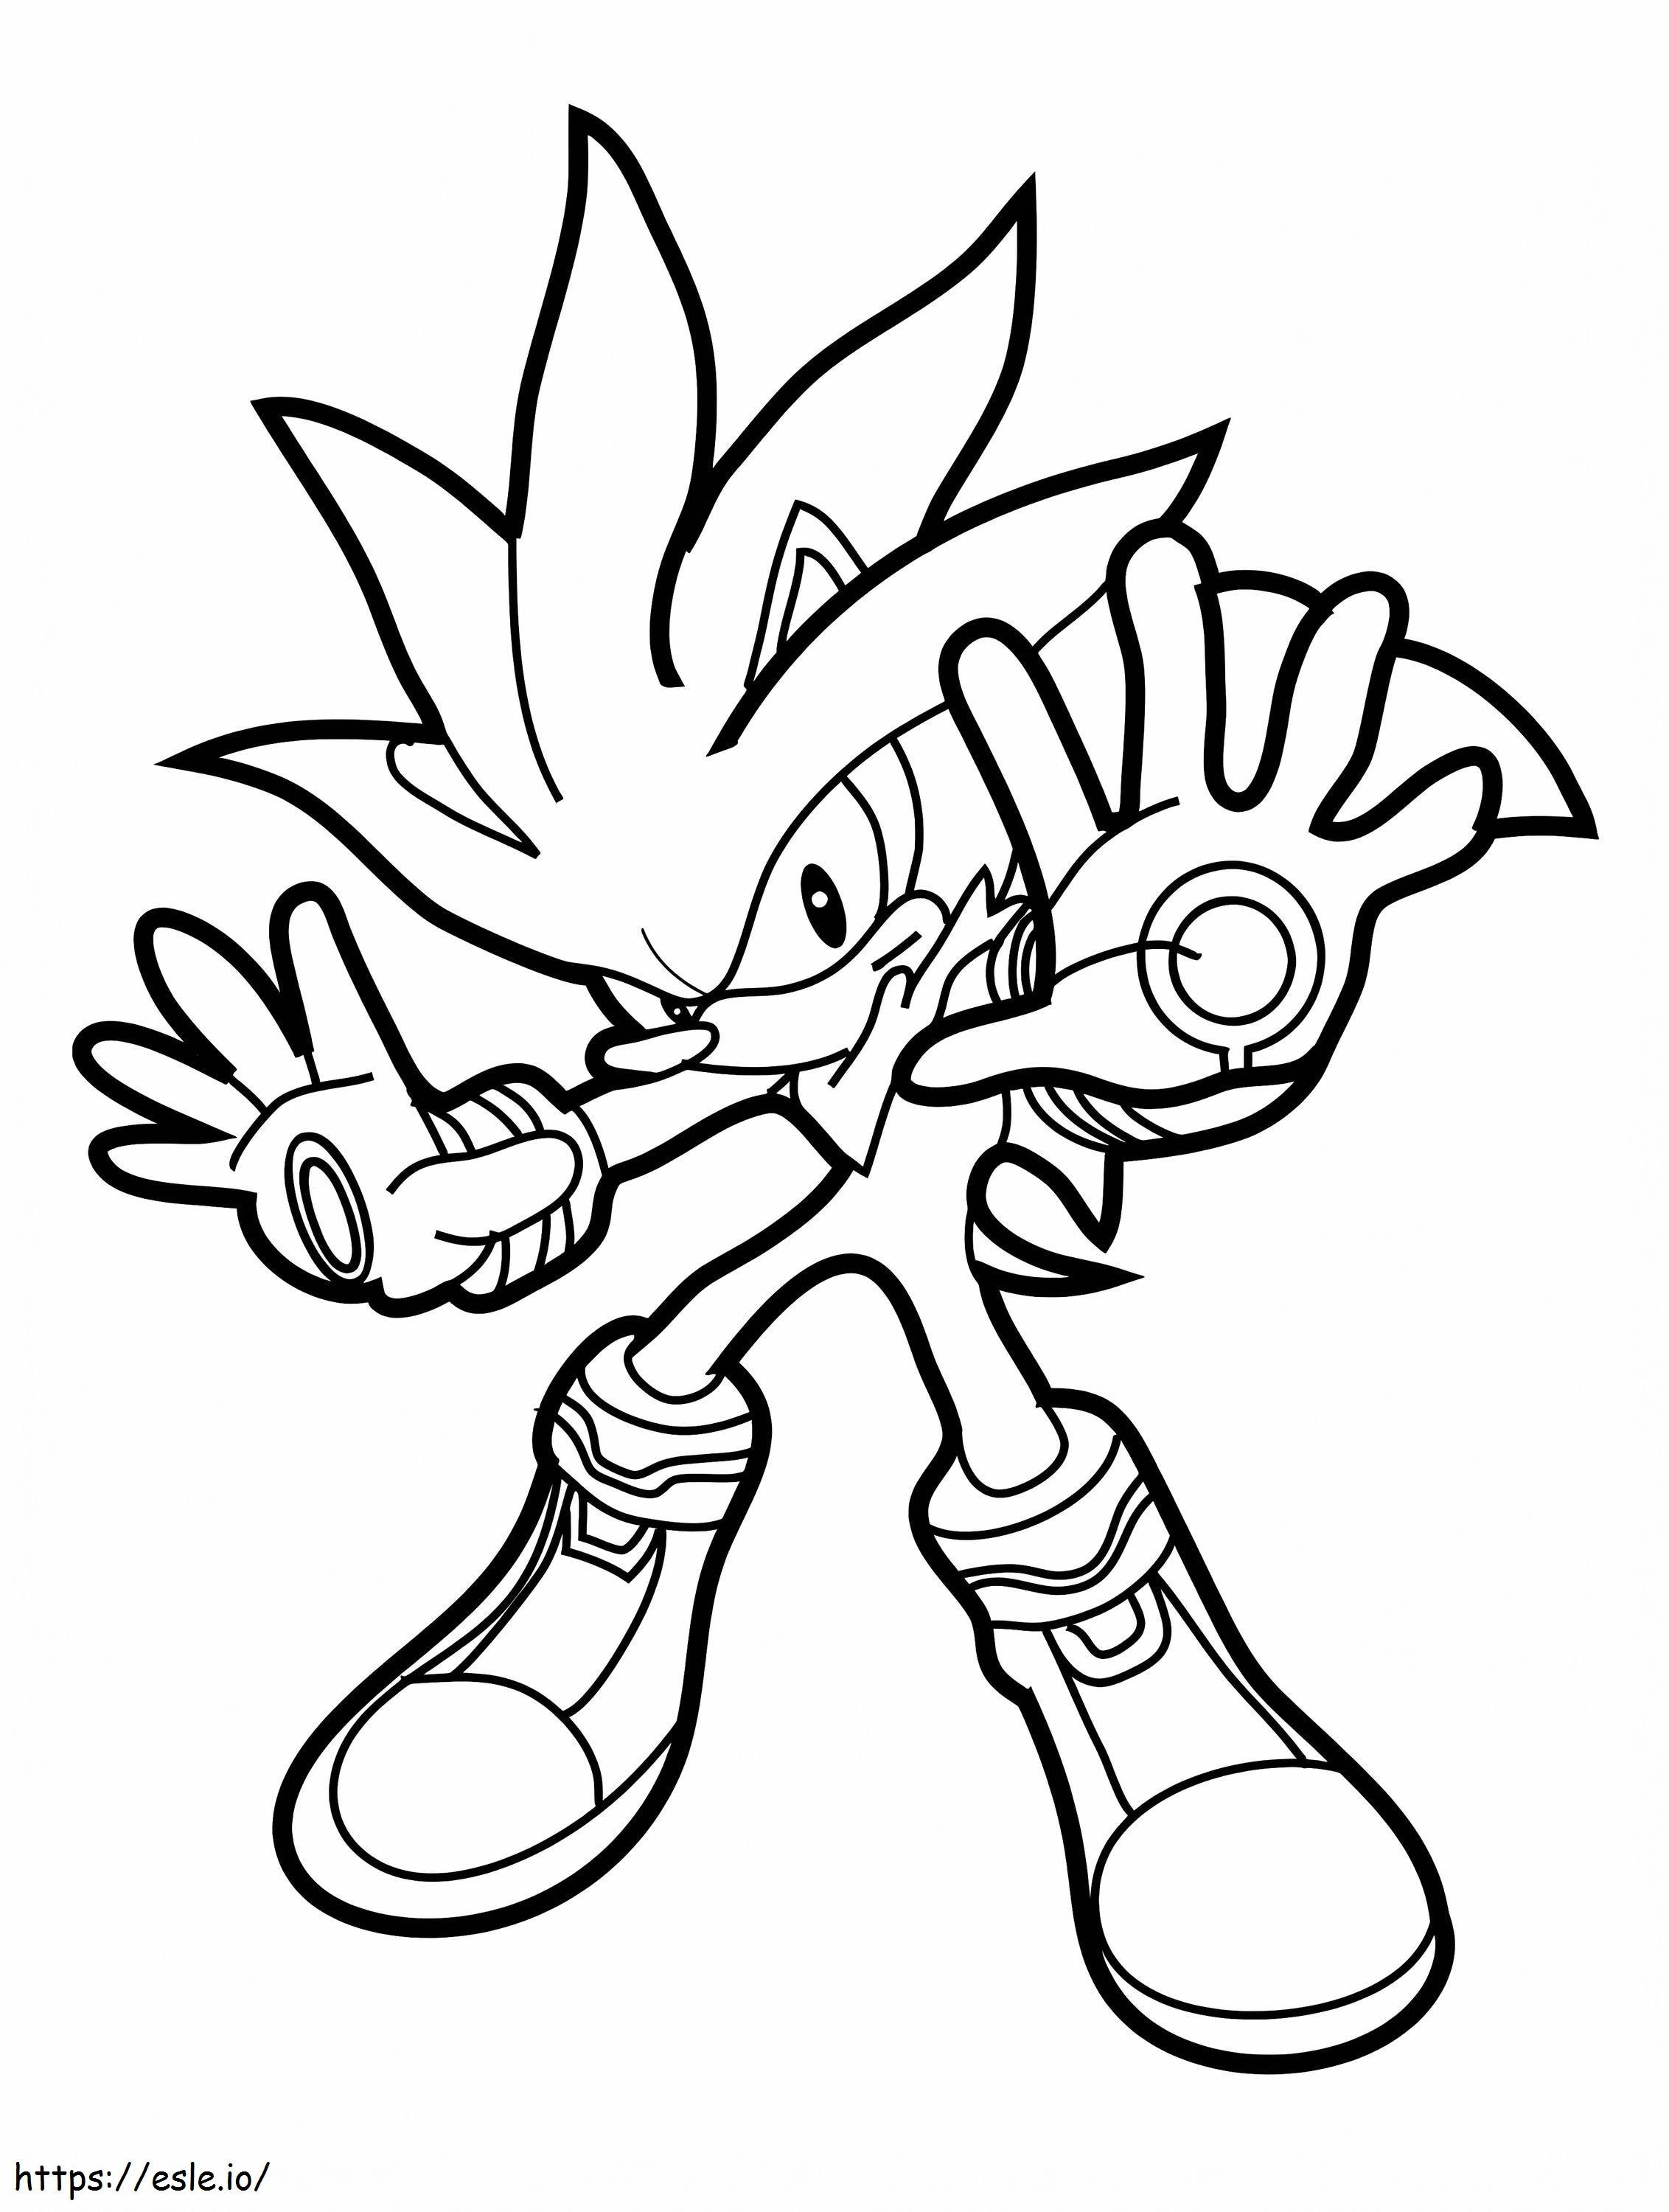 Shadow coloring page